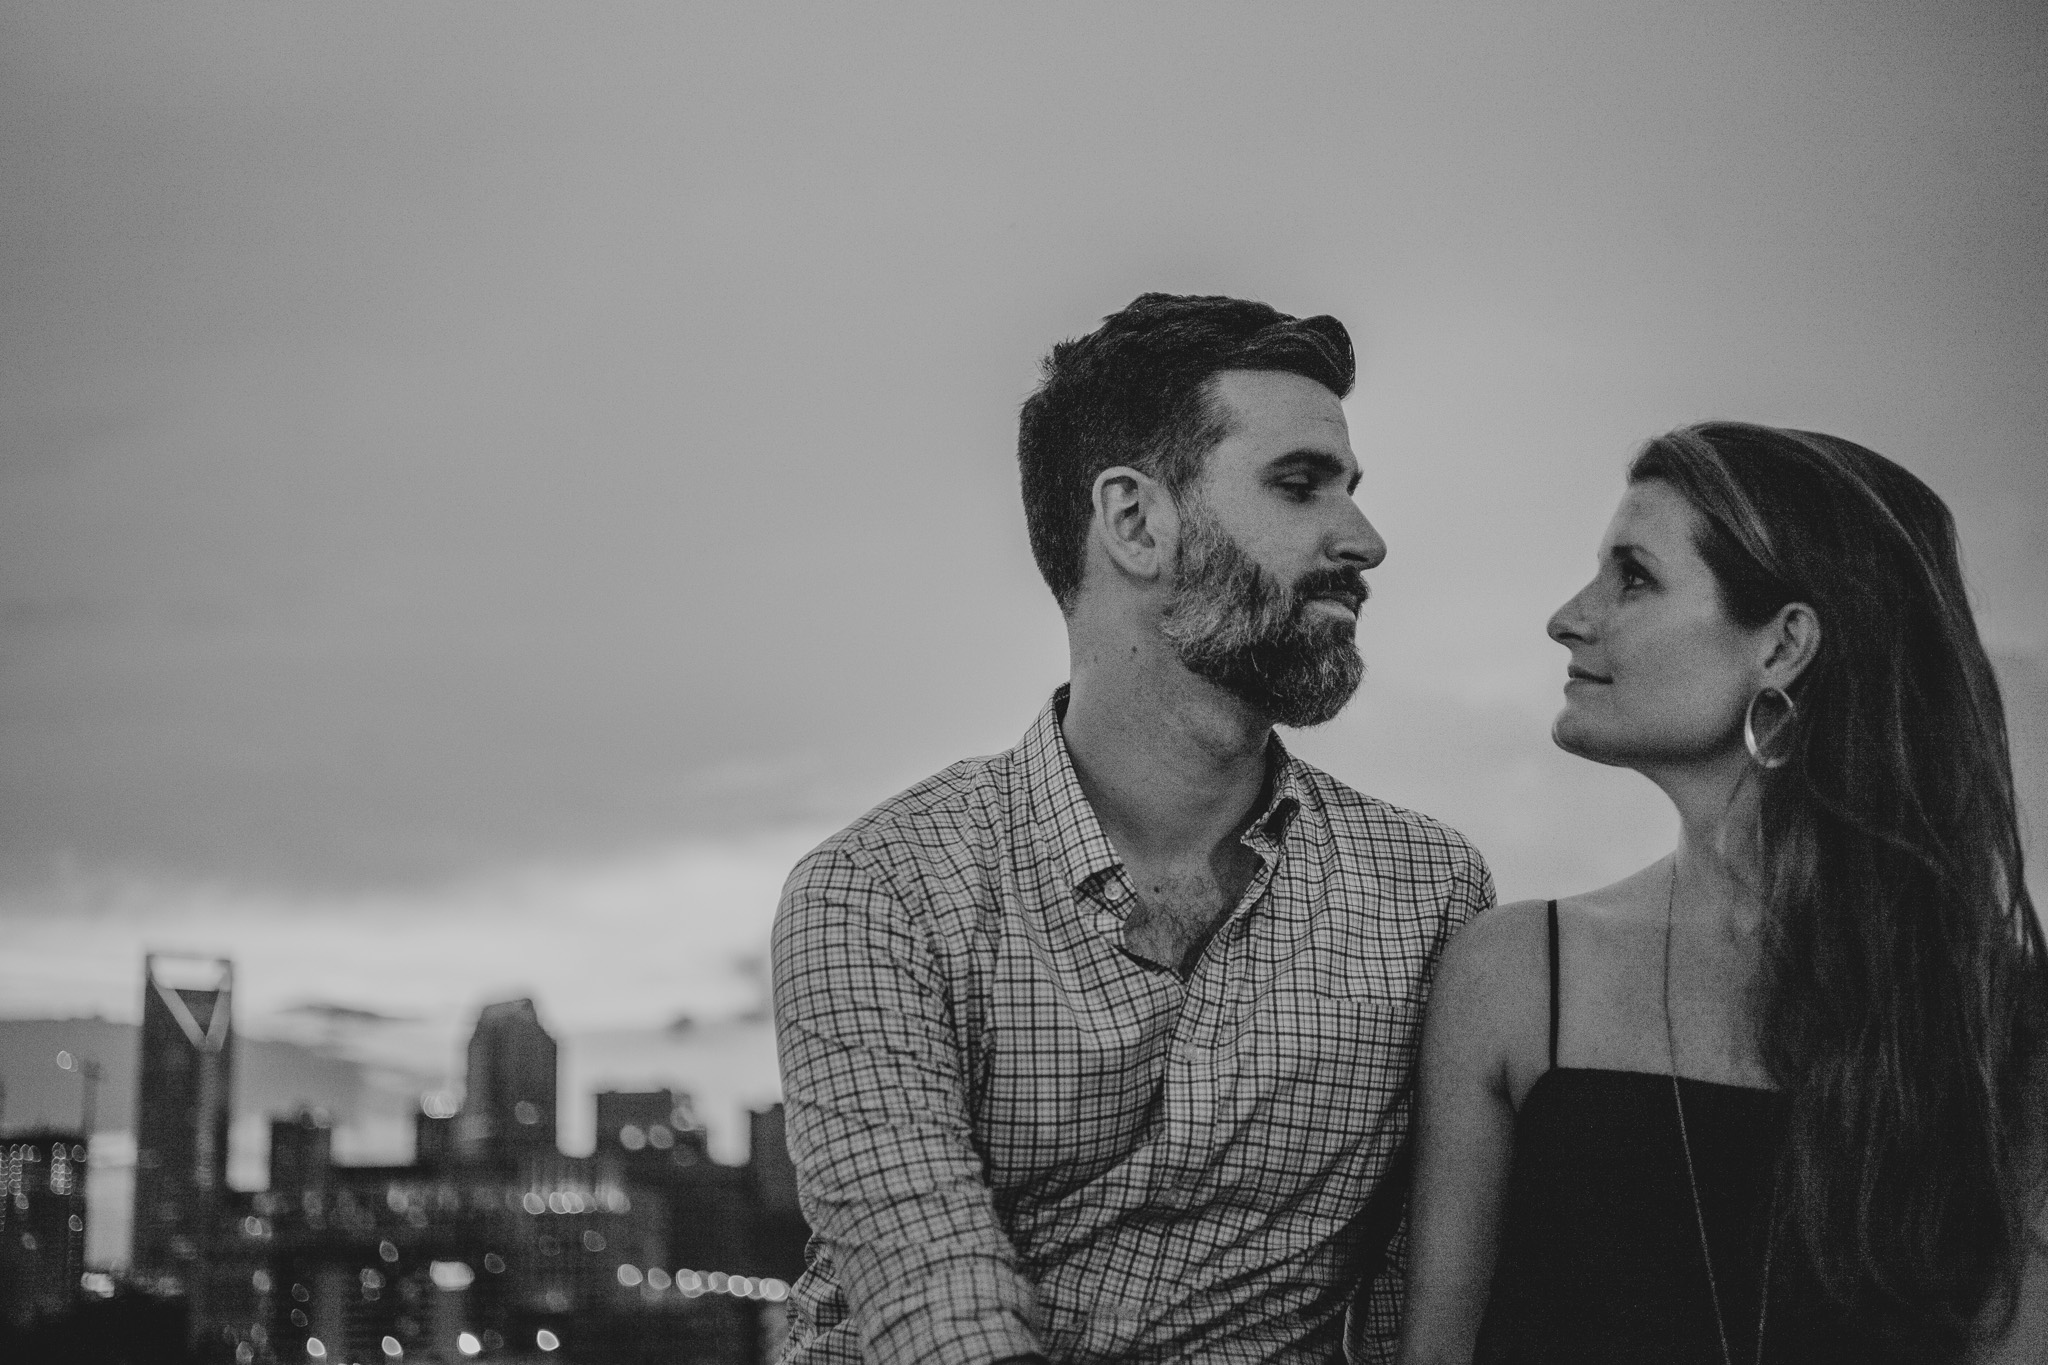 Stephen gazes into Caroline's eyes atop a Charlotte parking deck with the skyline in the background